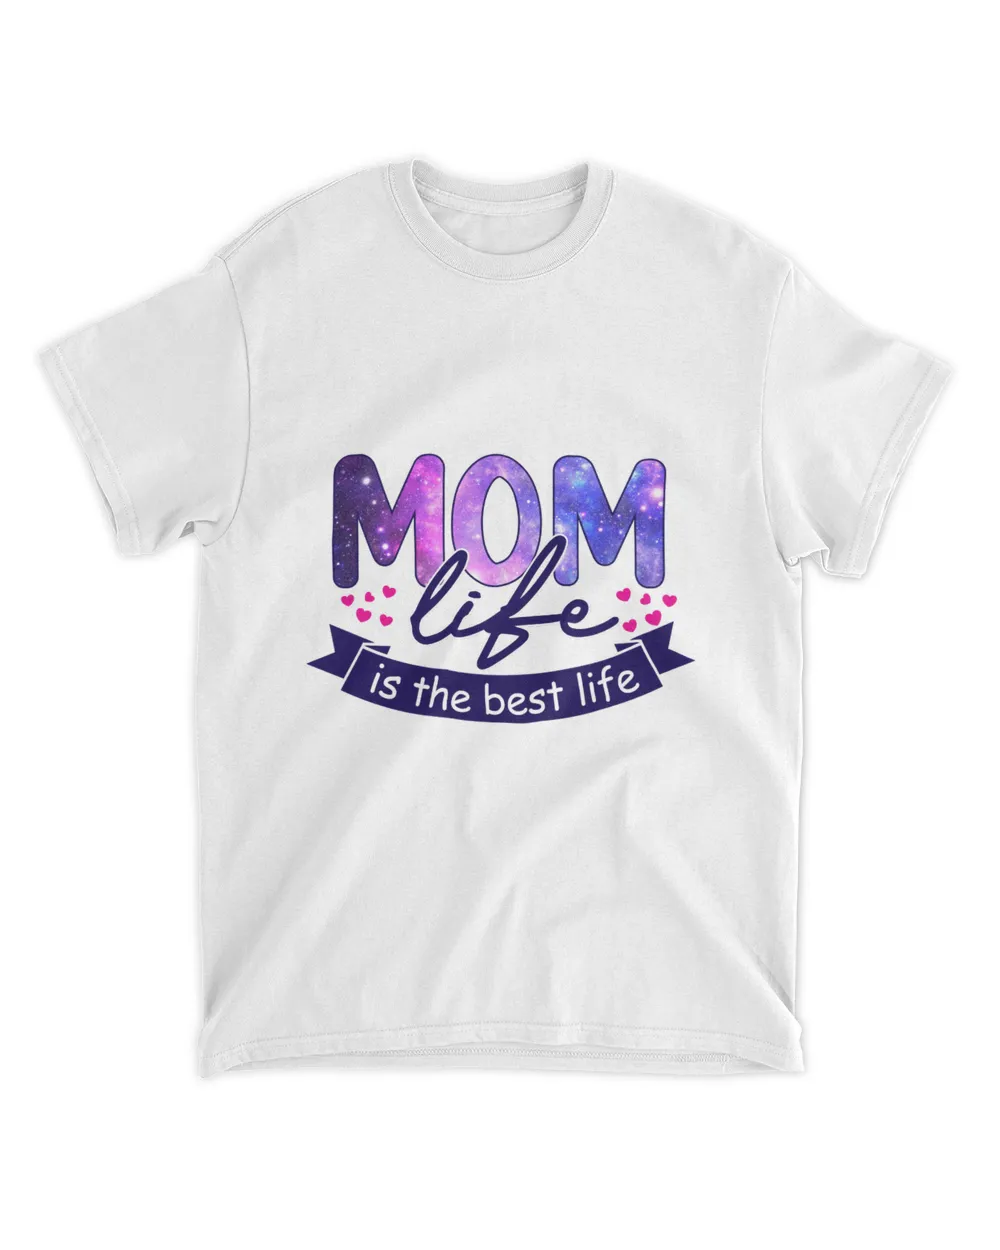 RD Mother Day Gift, Mom Life Is The Best Life Tee, Mom Gift, Mama Shirt, Best Mom Ever, Mother Day 2022 Shirt